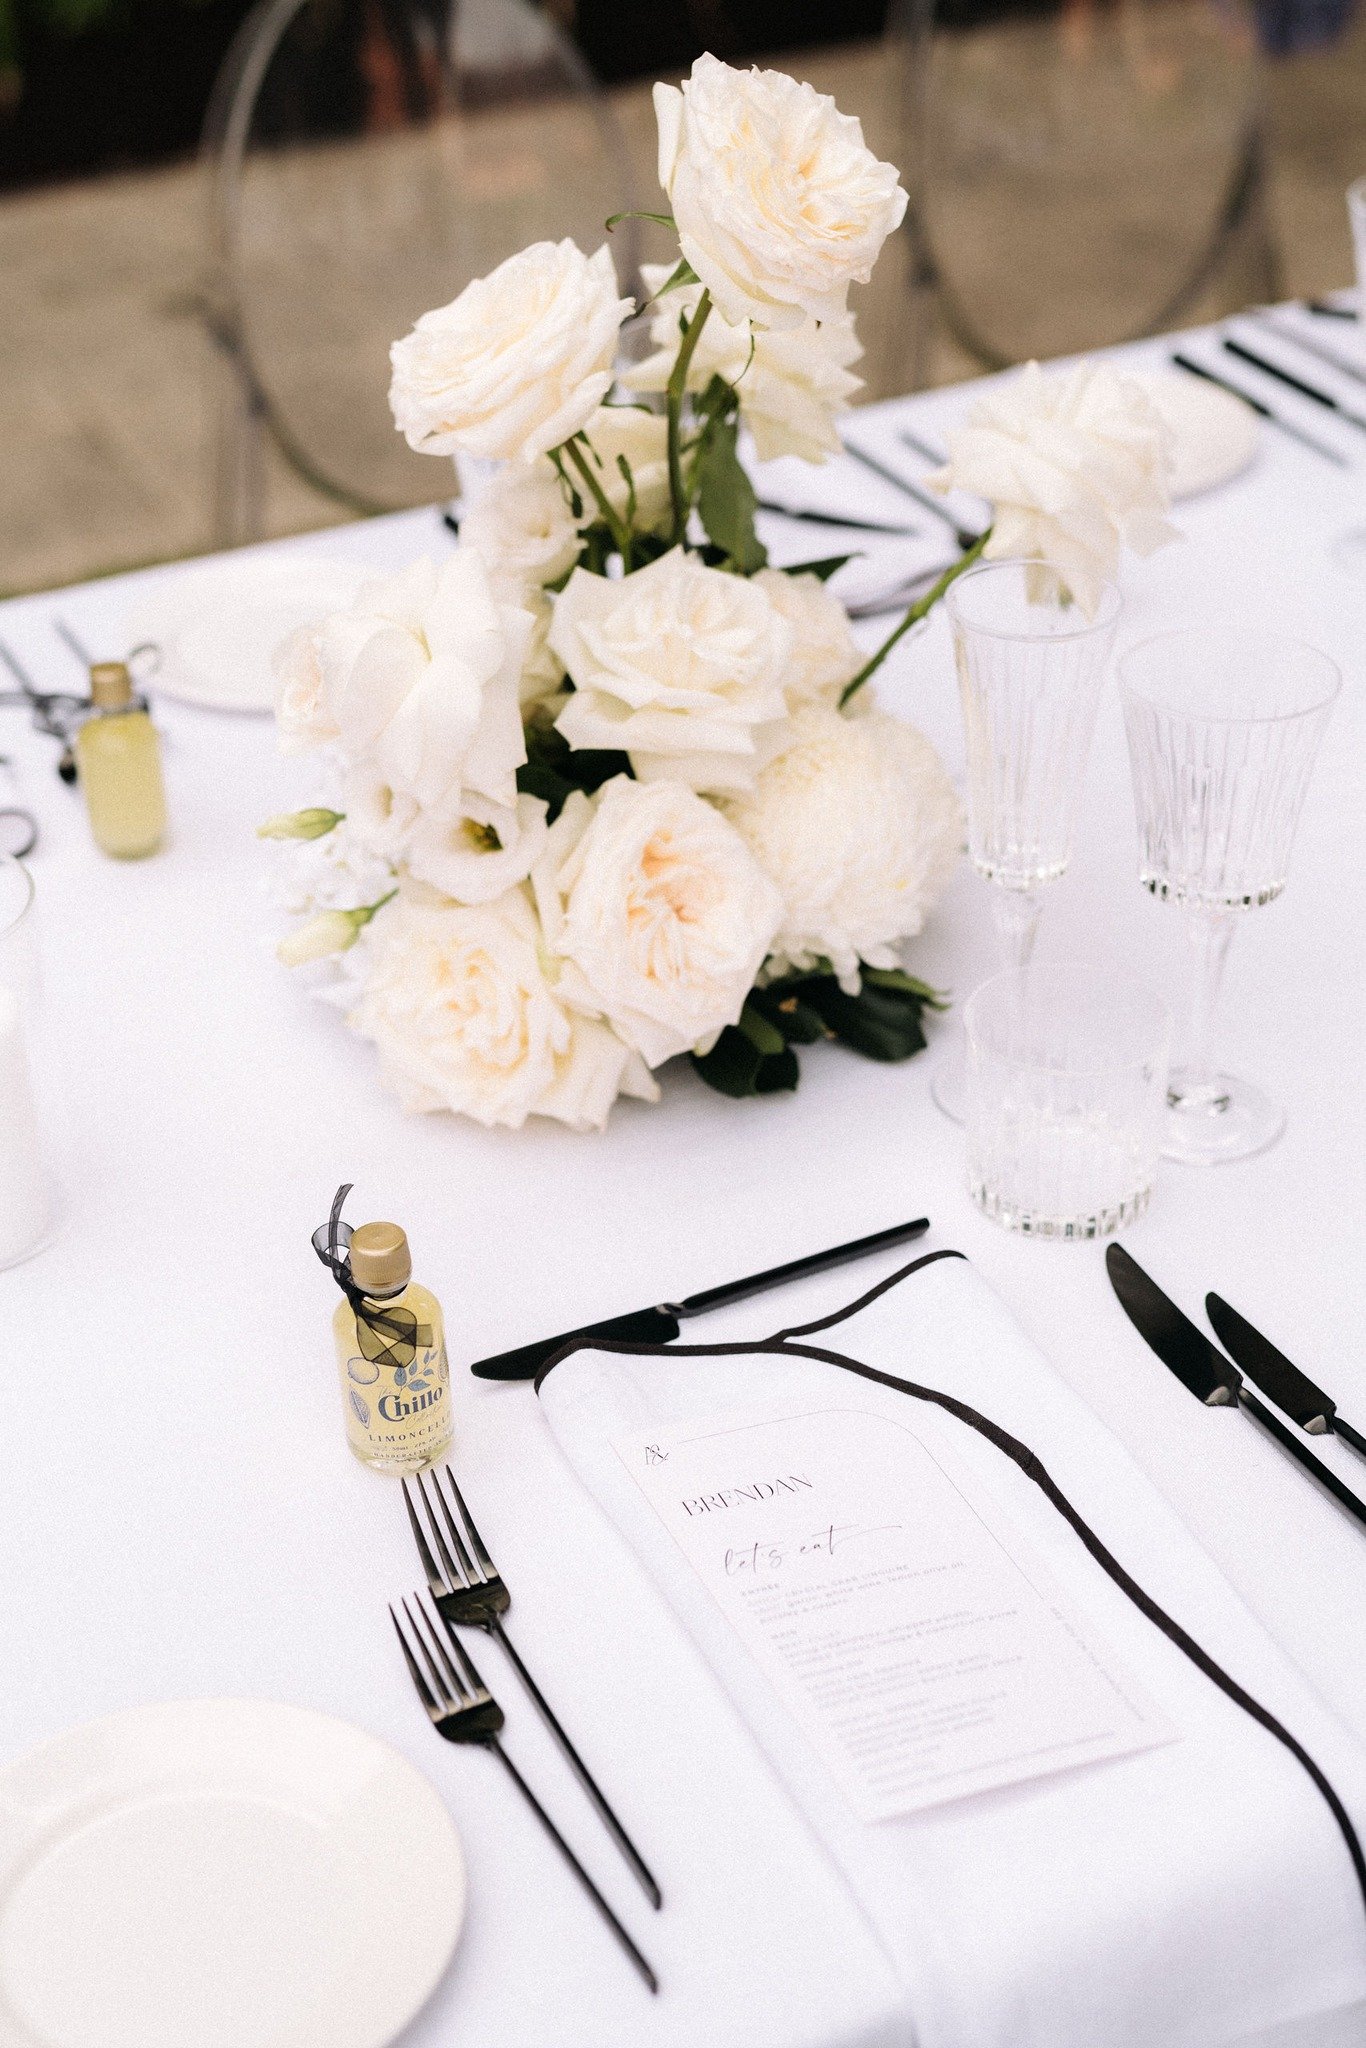 Details from one of our fave table settings of the season at one of our favourite venues @stgeorgescollegeperth 

Florals by @popfloralstudio 
Italiano Glassware &amp; Matte Black Cutlery by @hiresociety 
Napkin by @sideserve 
Limoncello by @chilloco